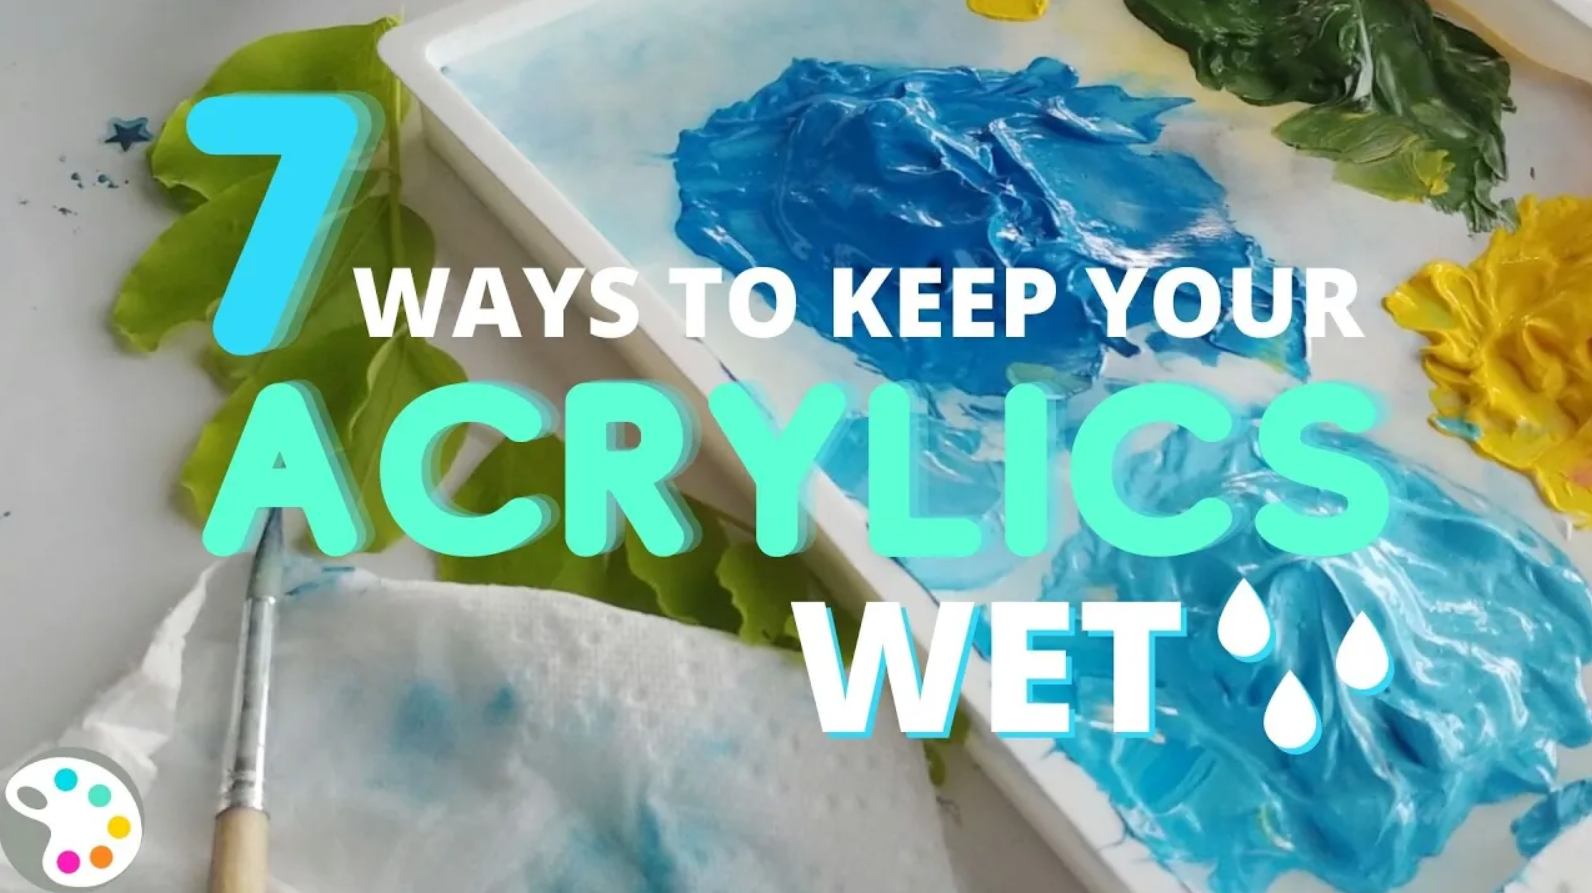 How to Slow Dry Time & Blend with Acrylics